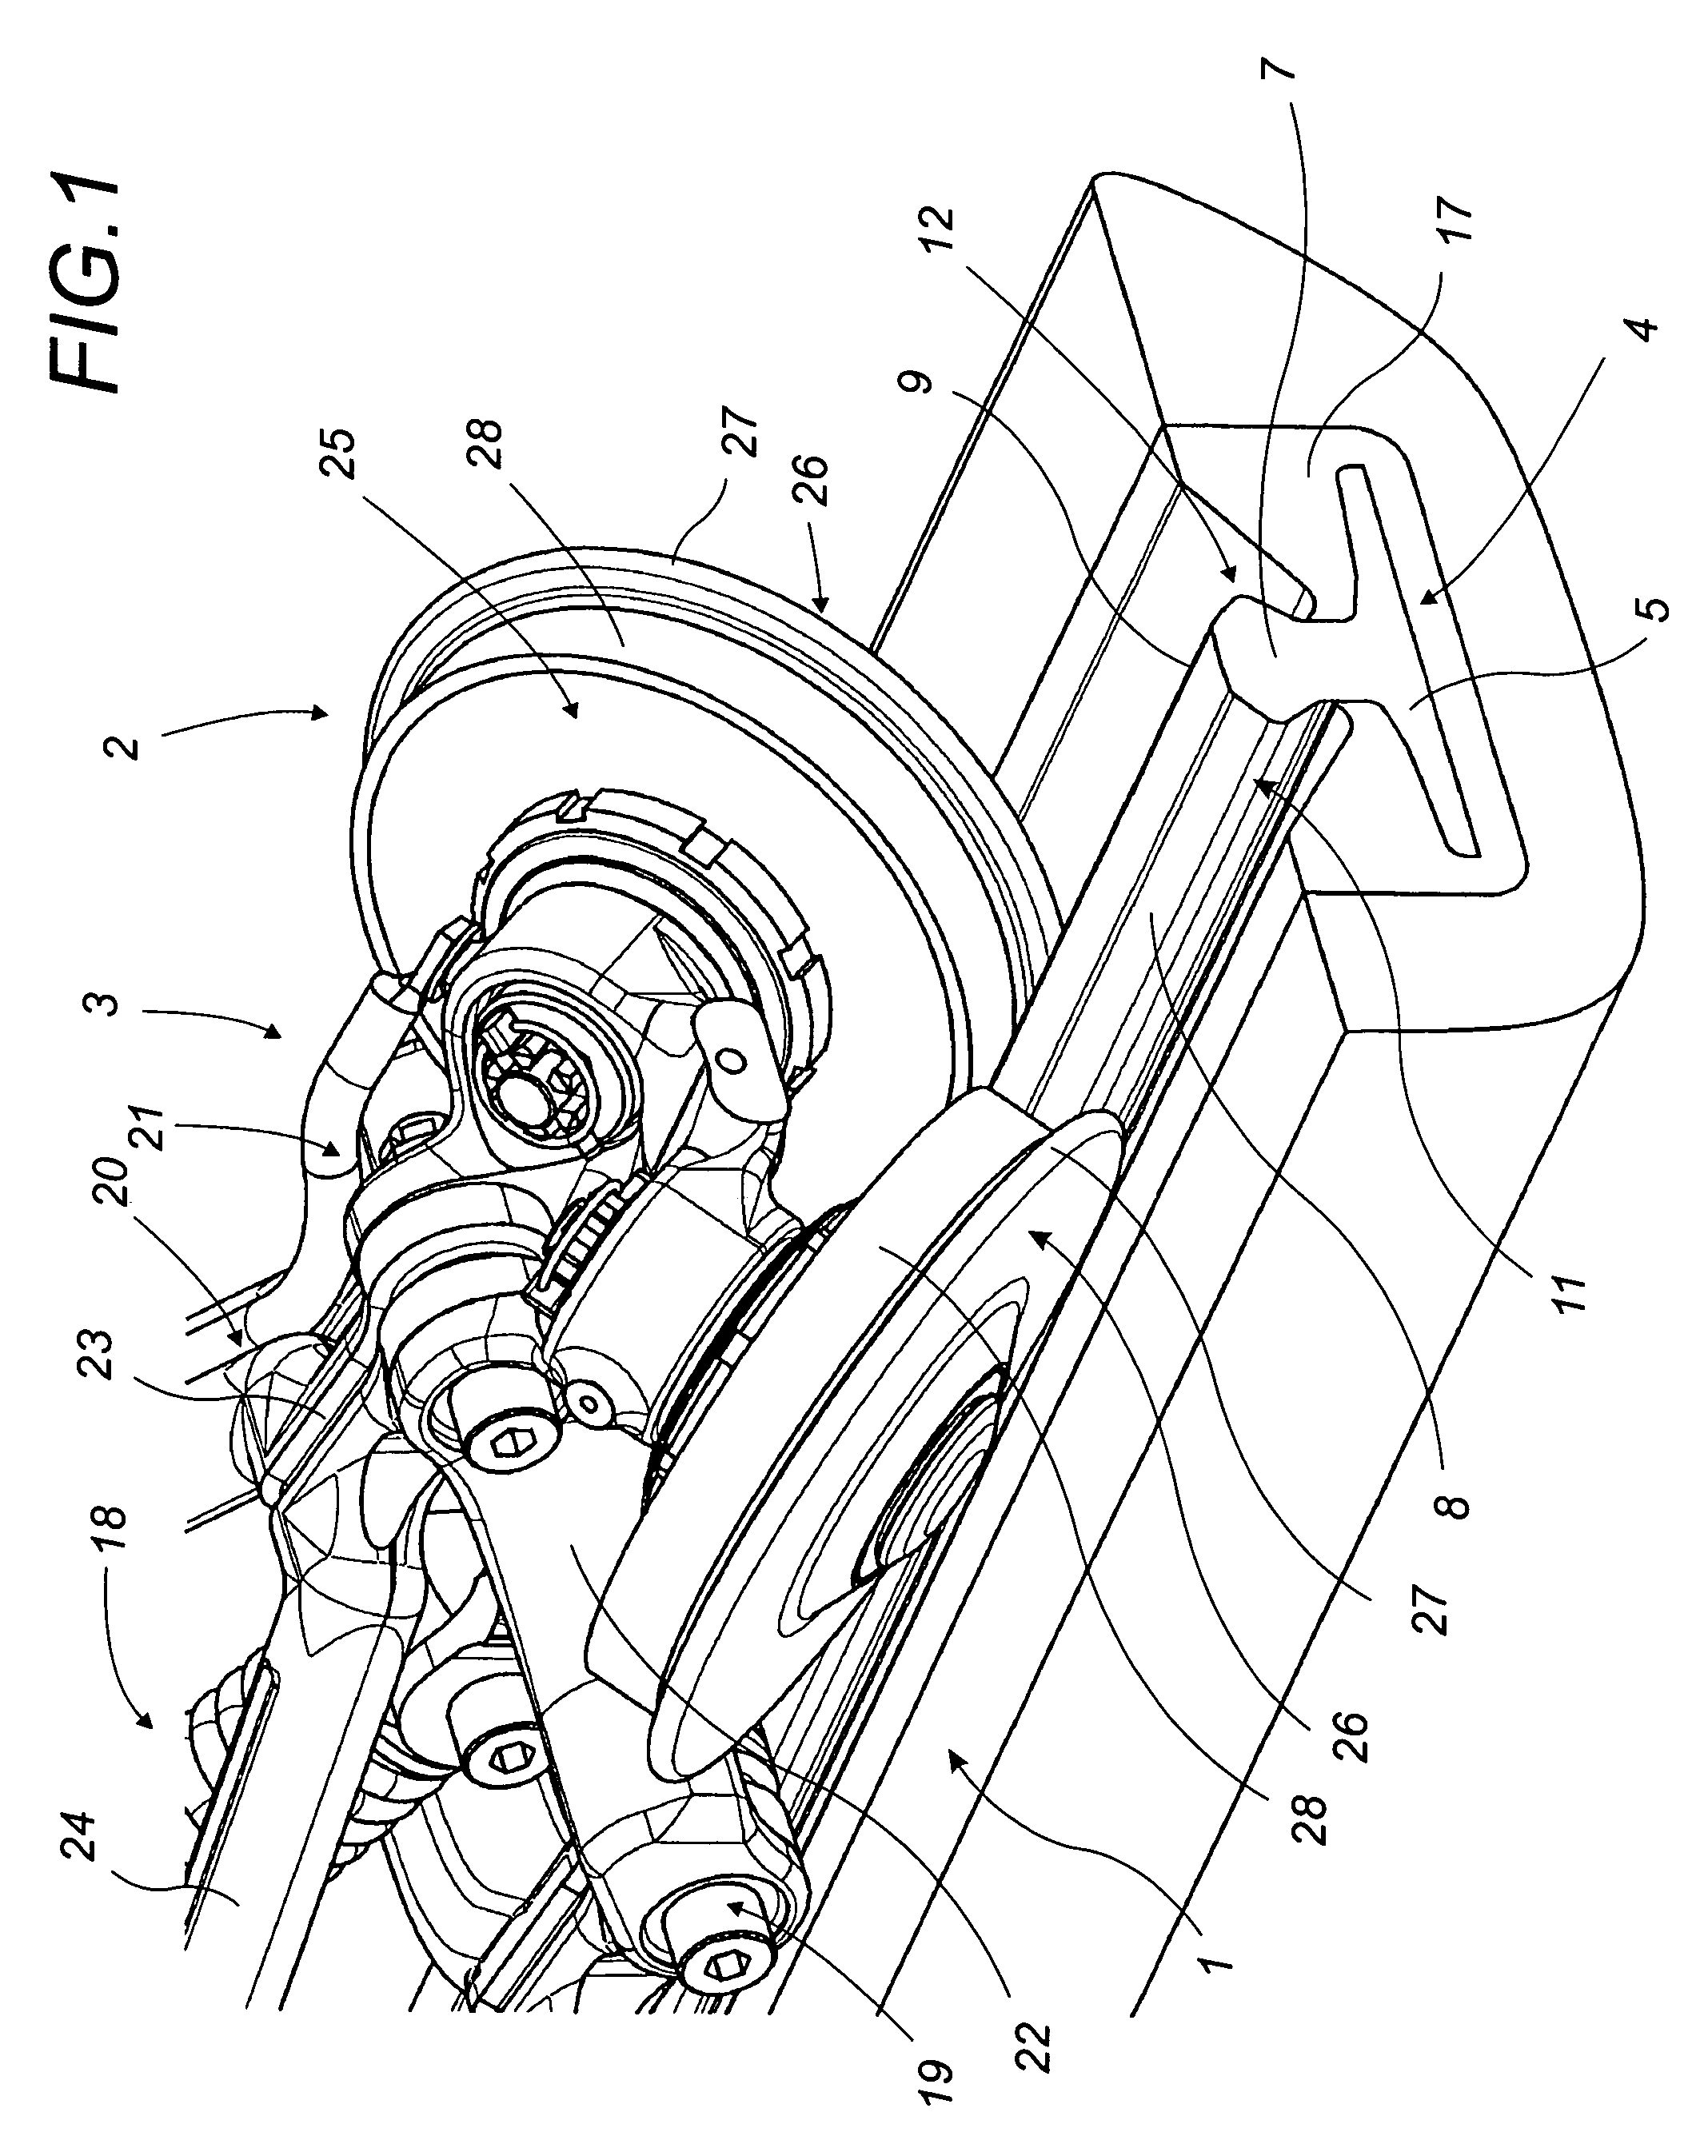 Guide assembly for guide rail comprising pair of angled guide wheels